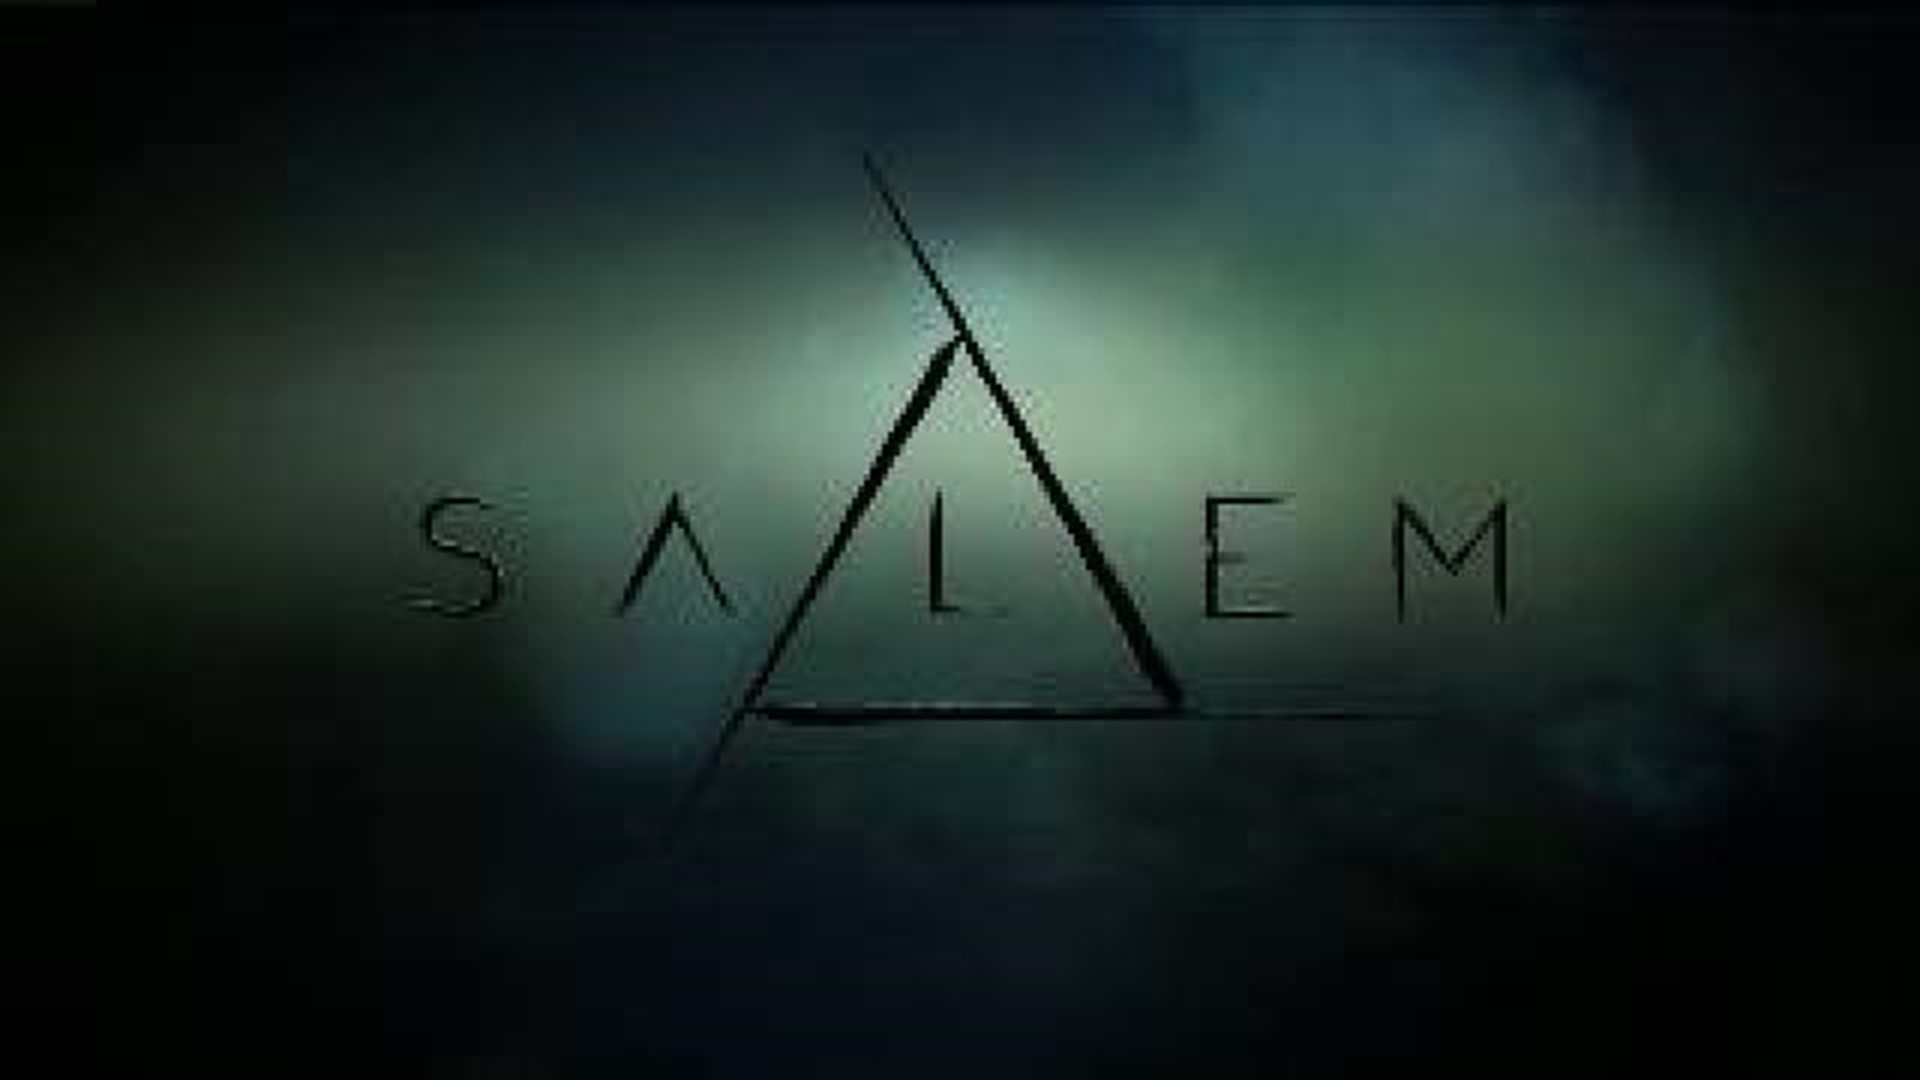 First Look at New TV Show "Salem"